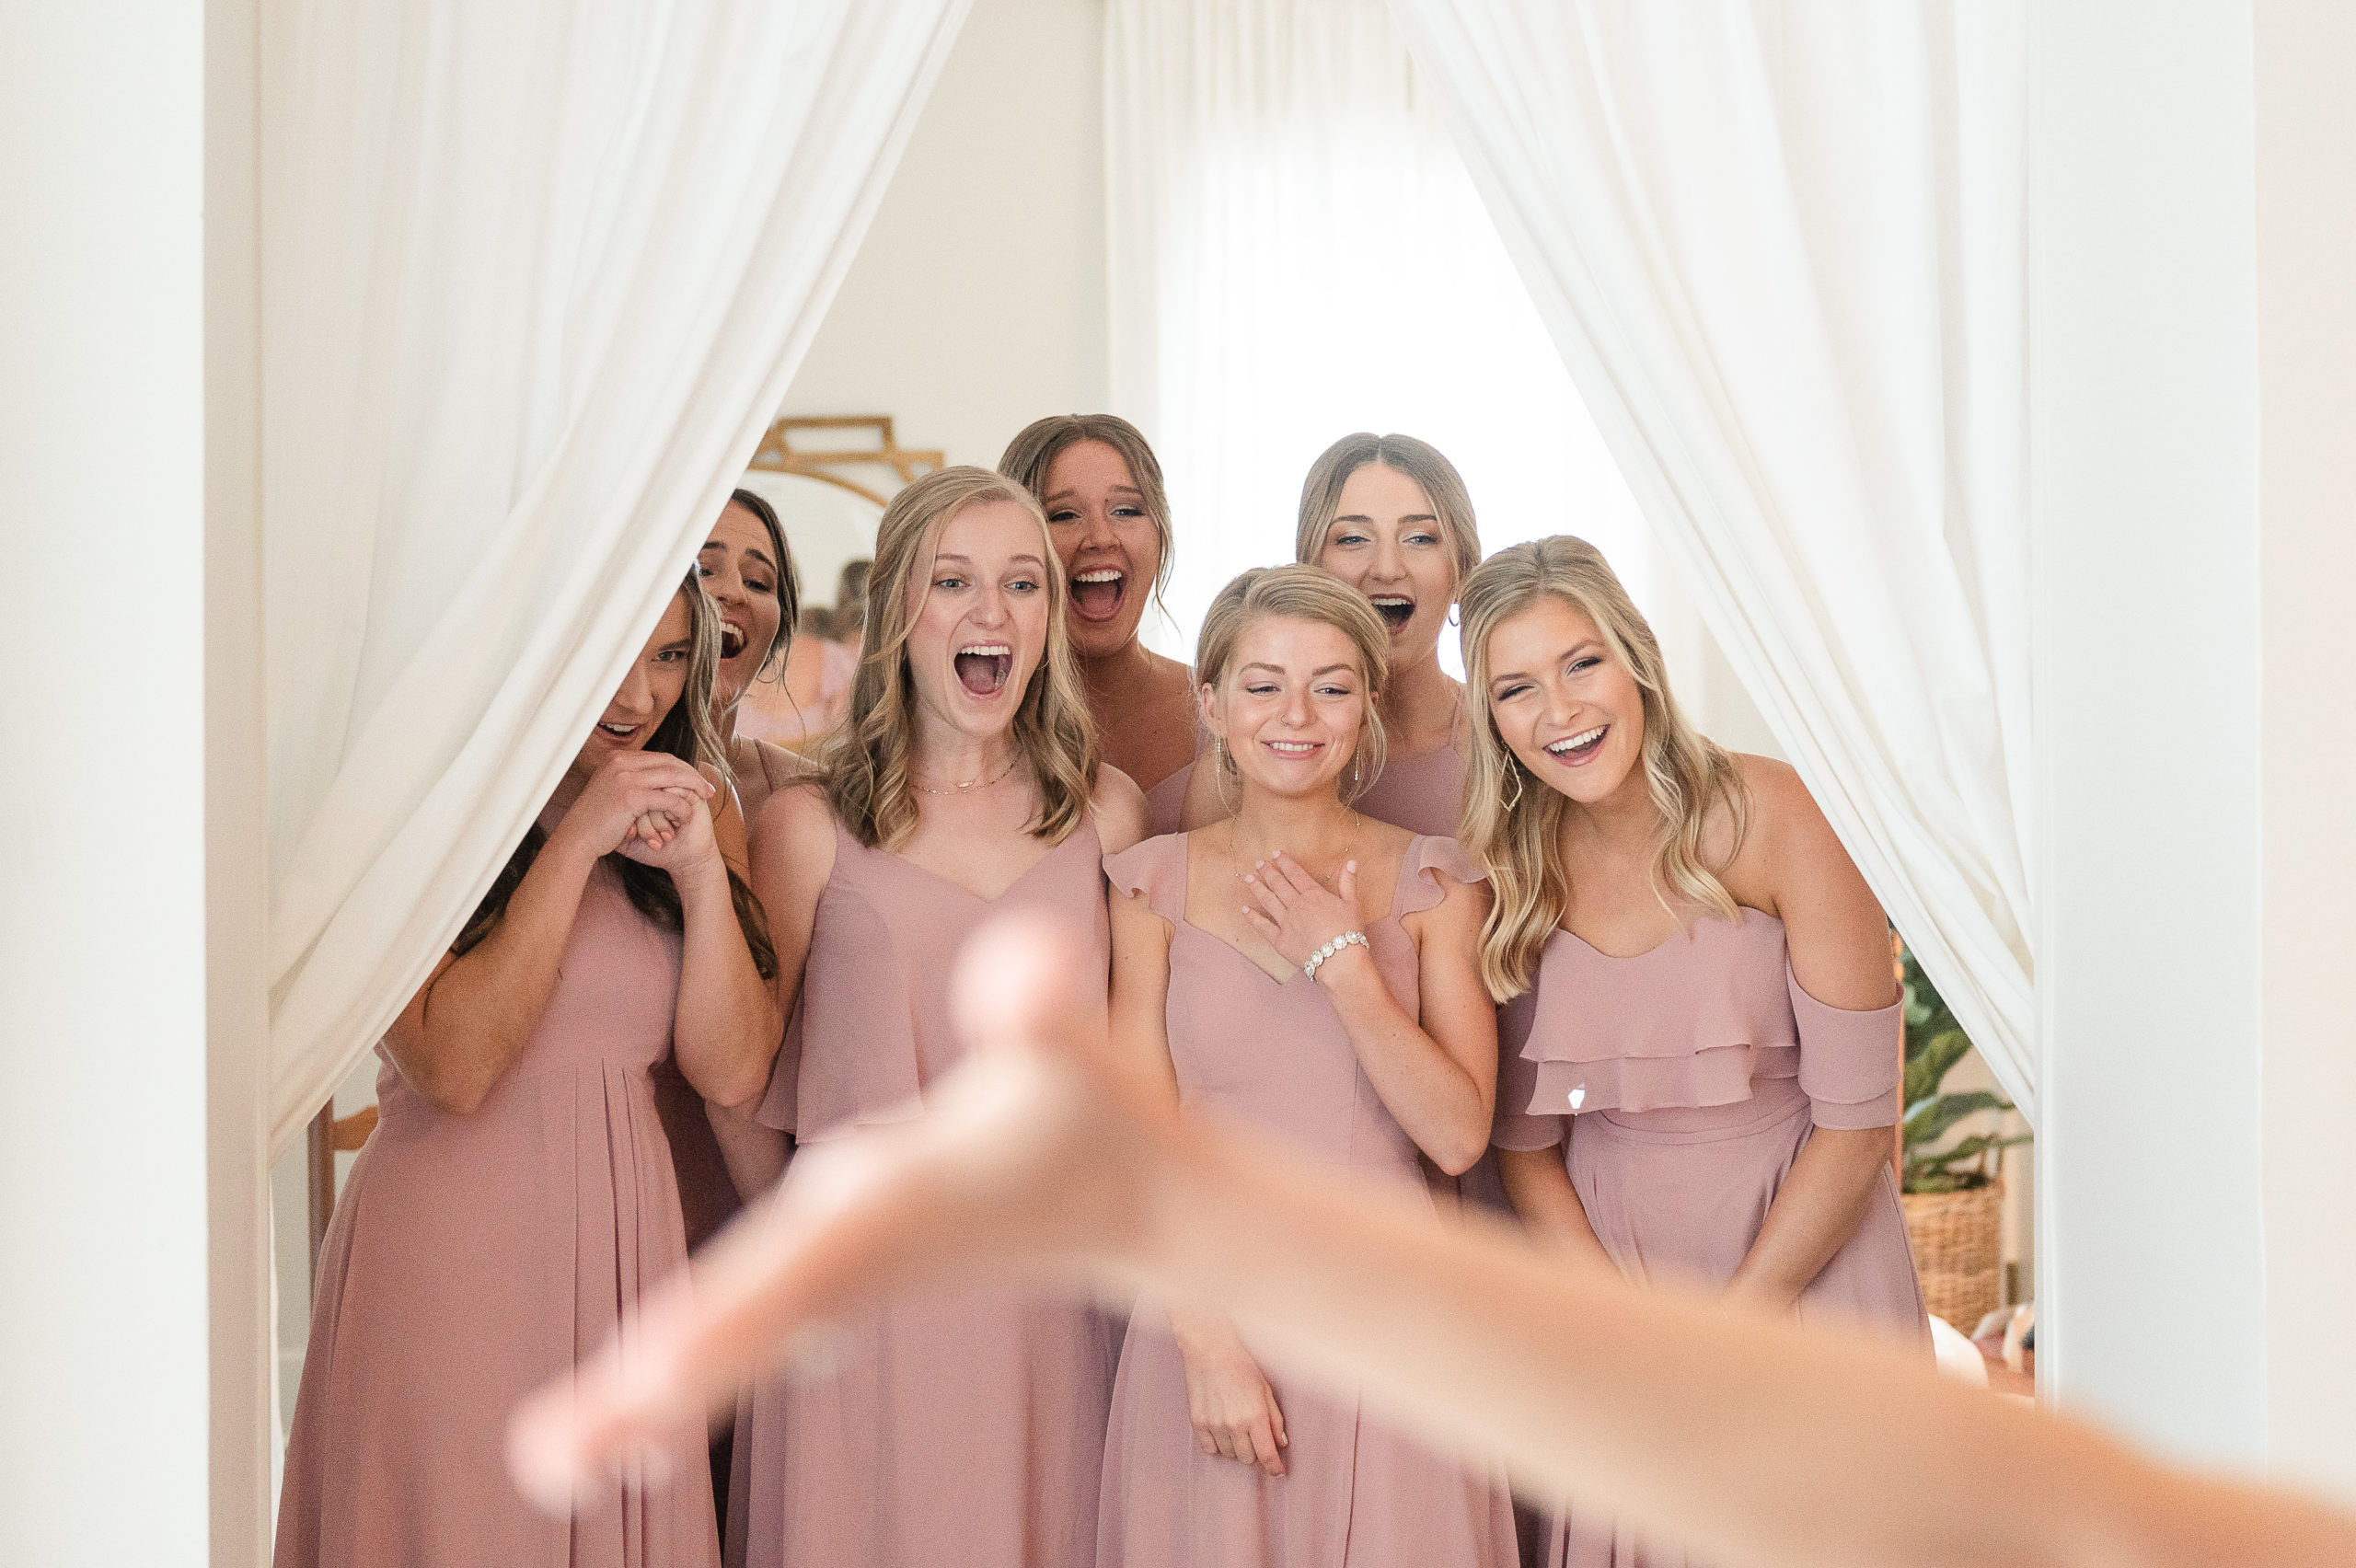 Excited and happy first look with bridesmaids and bride